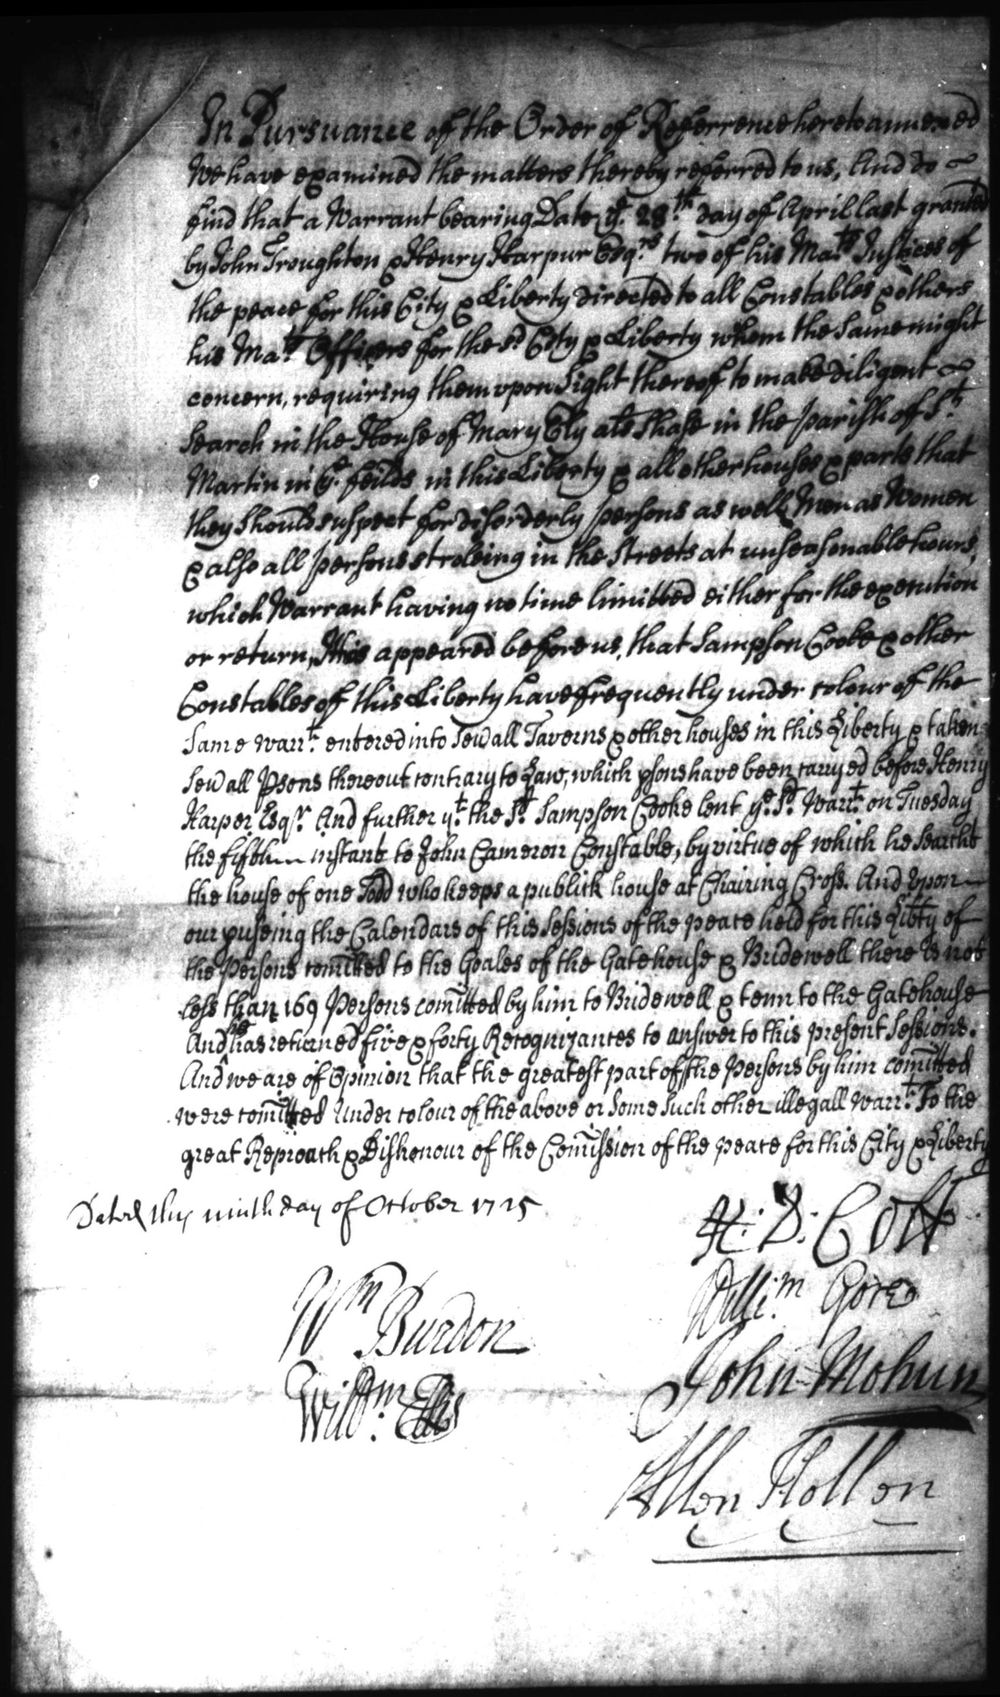 Figure 3.4 [Warrant to 'all constables' for the arrest of 'disorderly persons' (1725). LL, Westminster Sessions: Sessions Papers, October 1725 (LMWJPS653740010)](http://www.londonlives.org/browse.jsp?div=LMWJPS65374PS653740010).